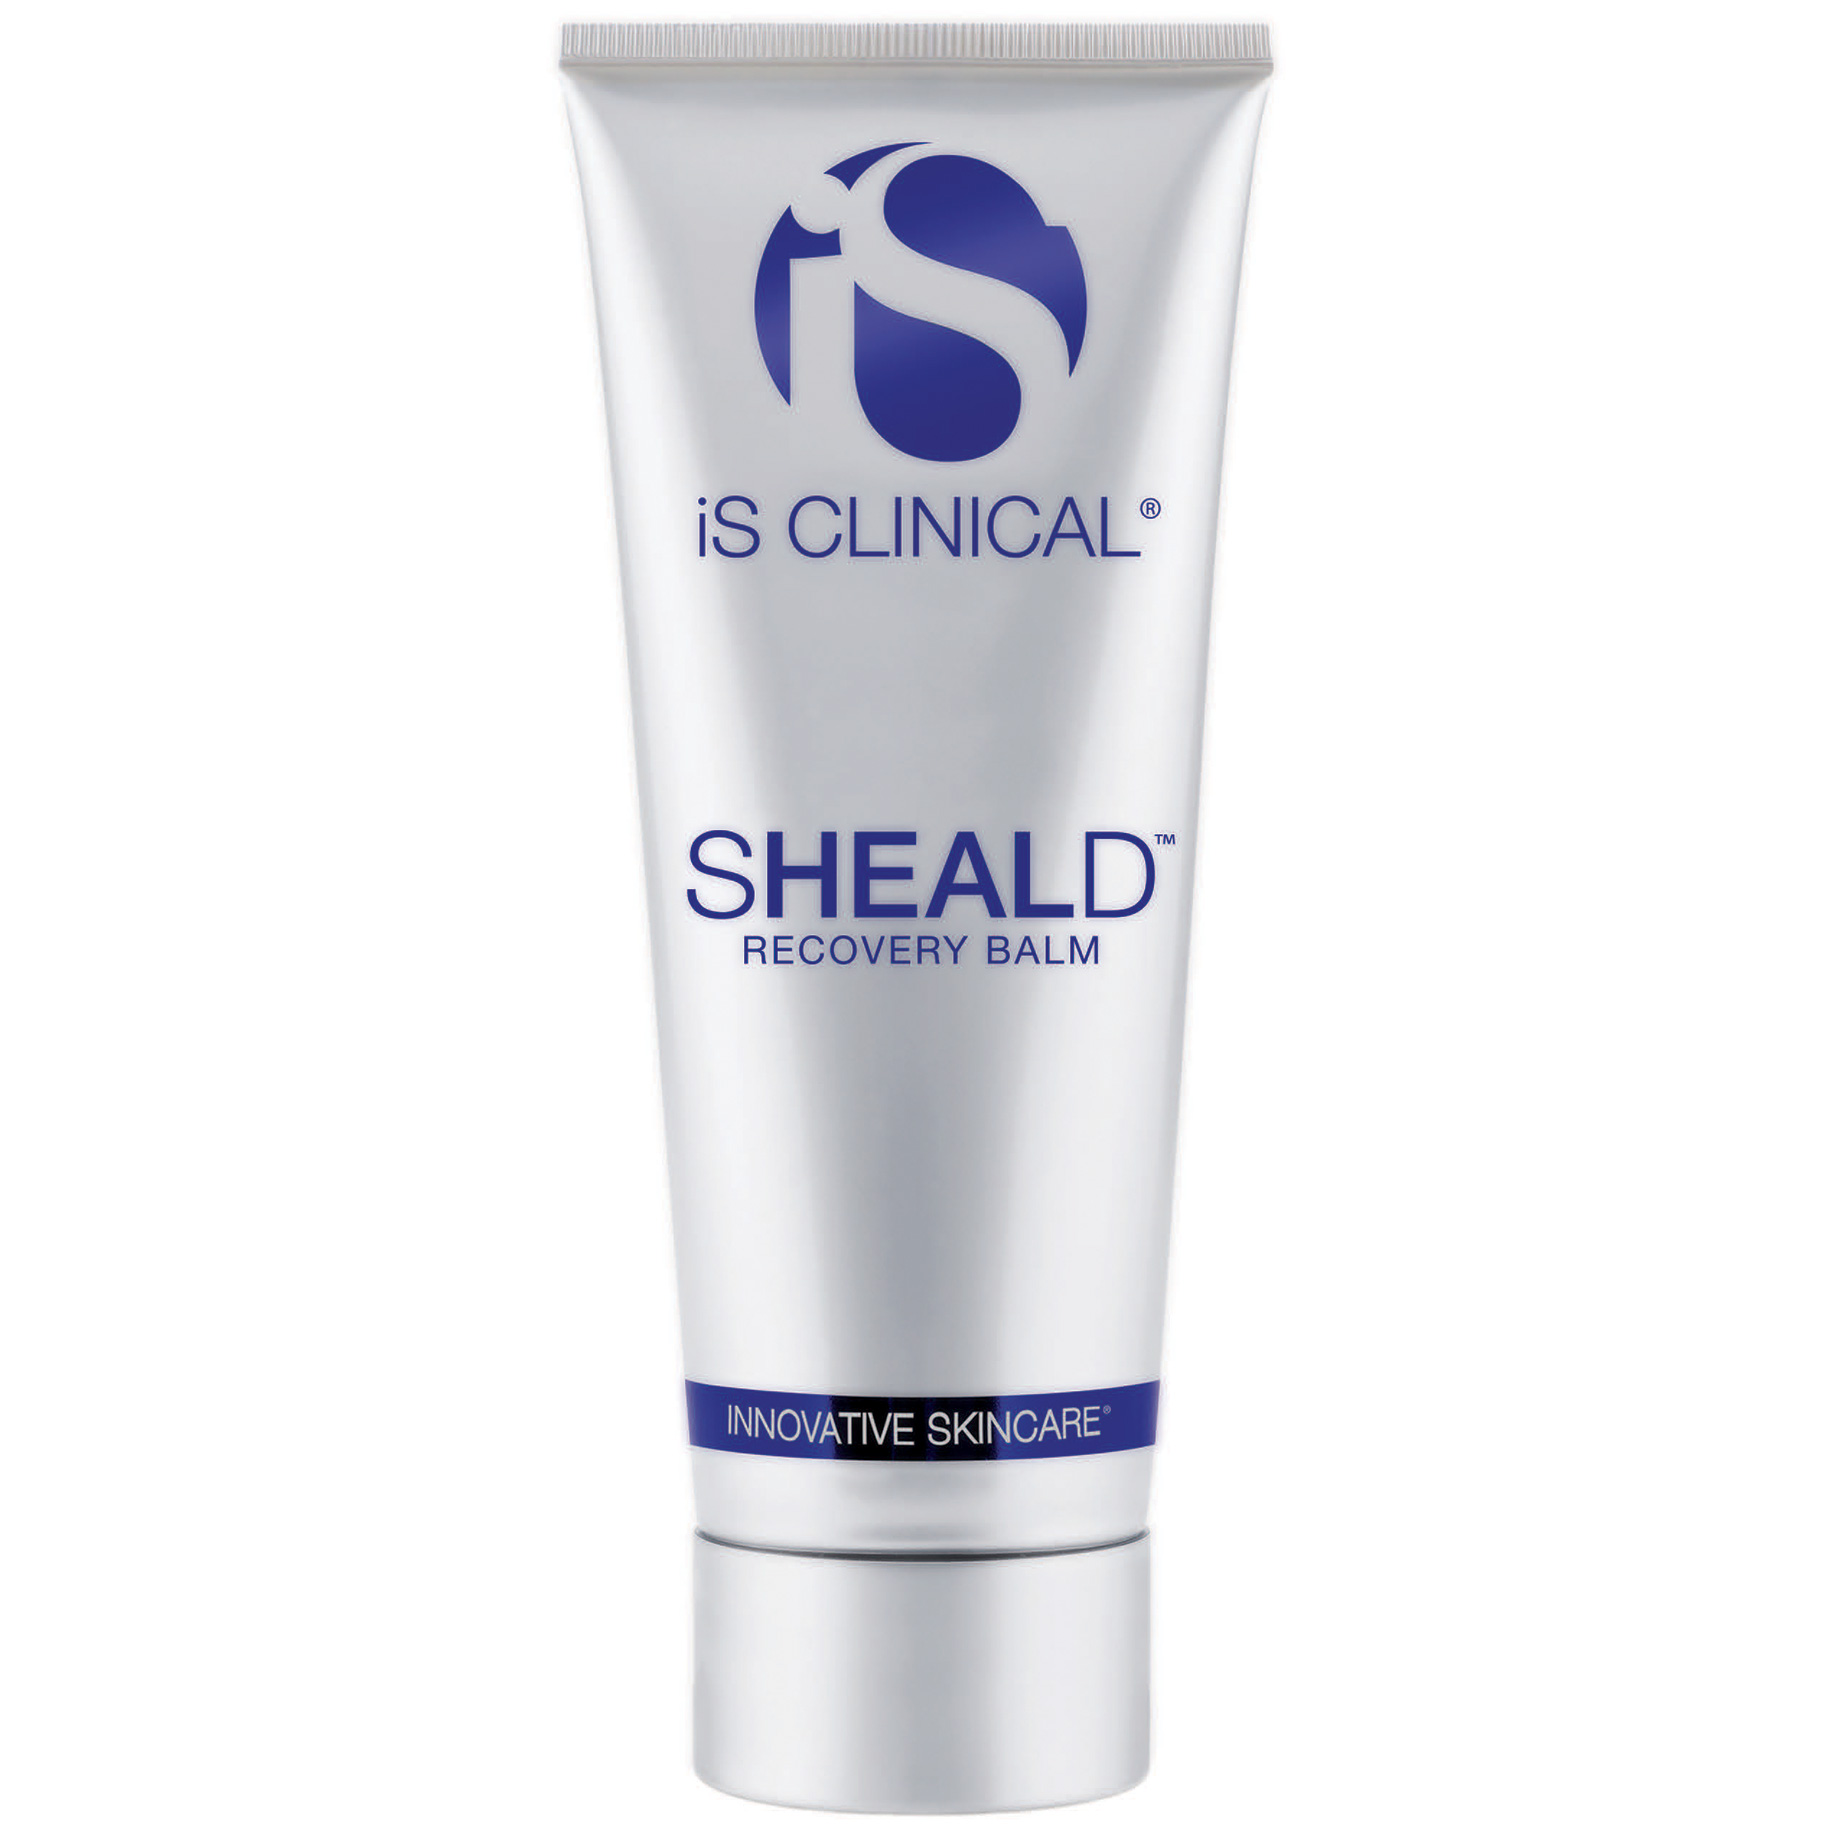 iS Clinical Sheald Recovery Balm 